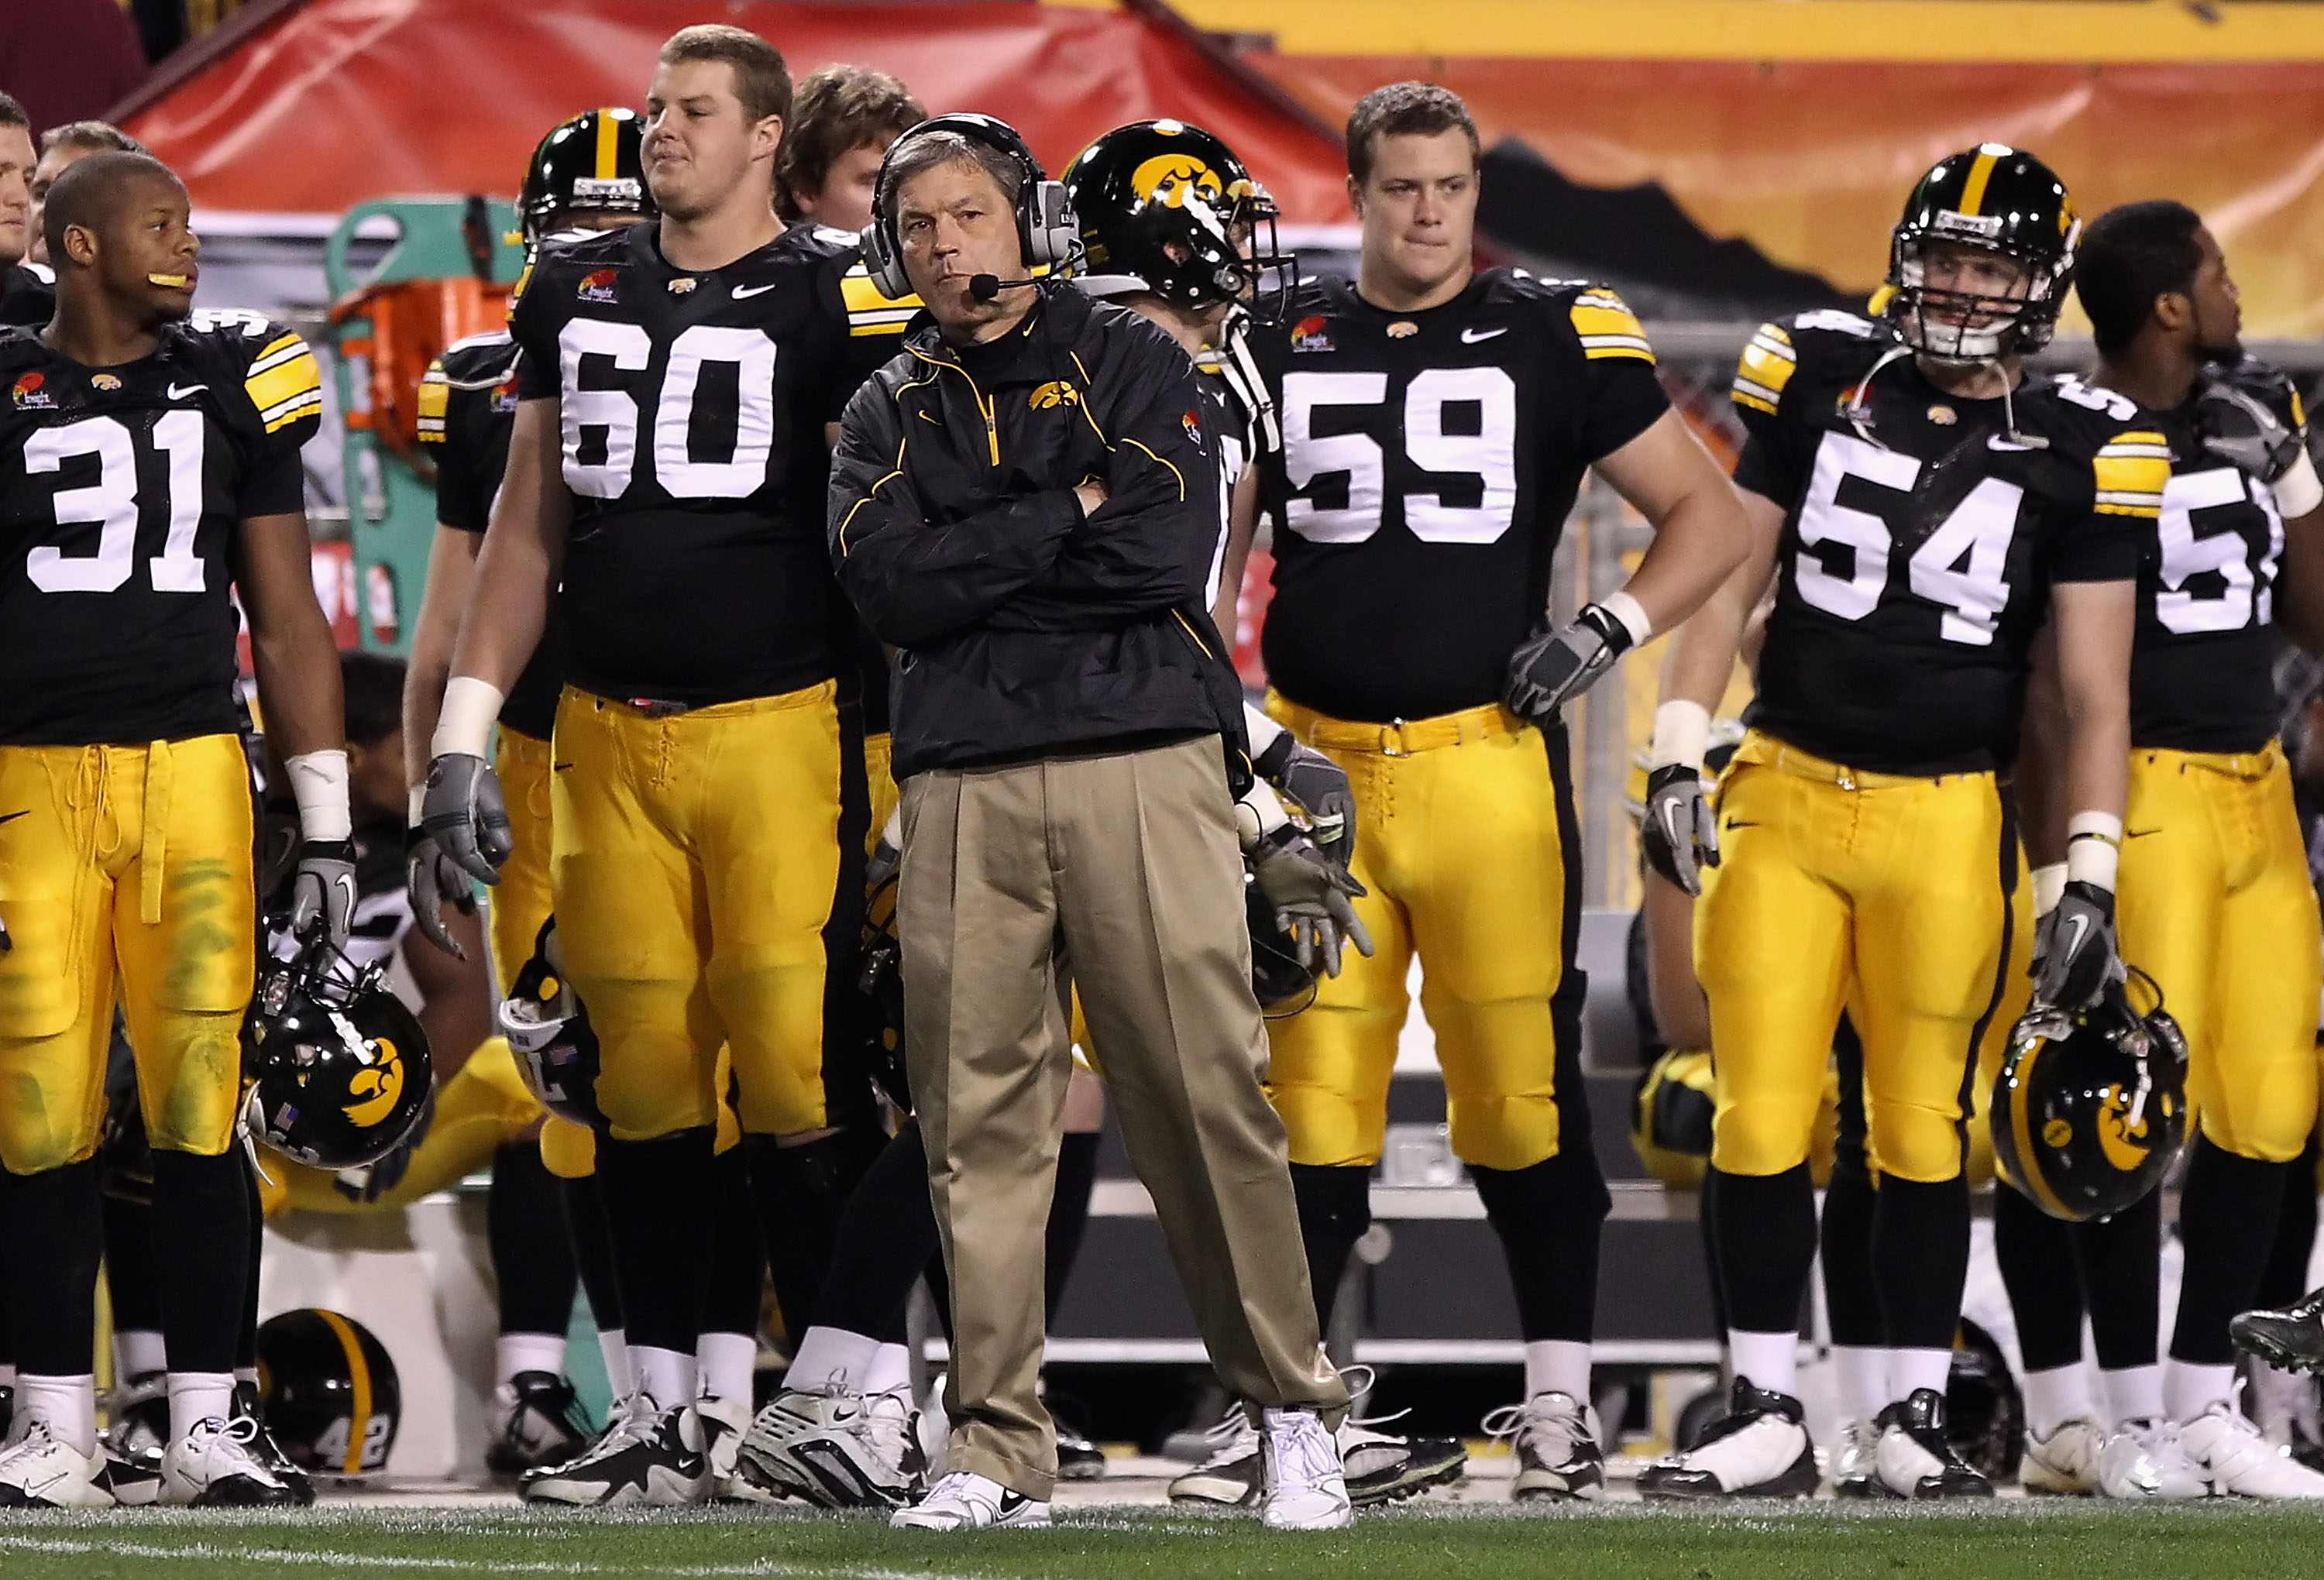 TEMPE, AZ - DECEMBER 28:  Head coach Kirk Ferentz of the Iowa Hawkeyes during the Insight Bowl against the Missouri Tigers at Sun Devil Stadium on December 28, 2010 in Tempe, Arizona.  The Hawkeyes defeated the Tigers 27-24.  (Photo by Christian Petersen/